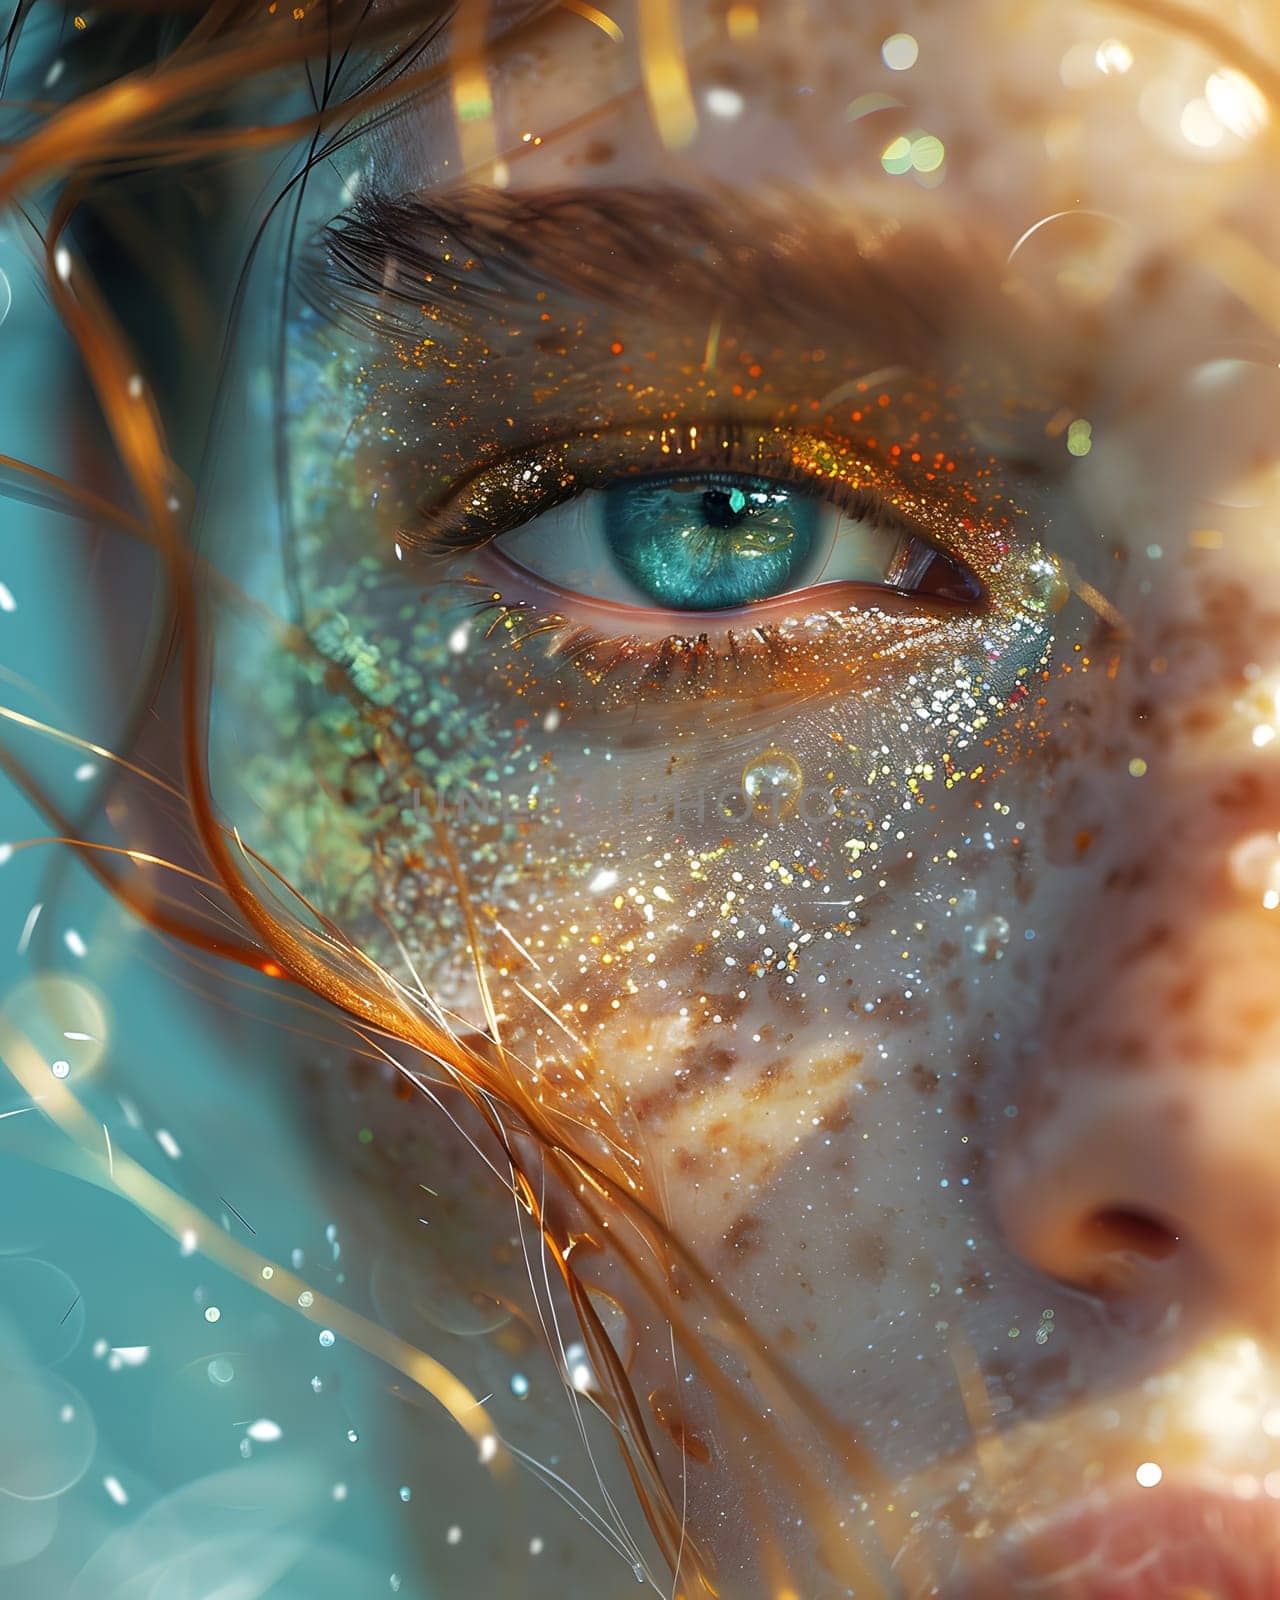 A closeup of a womans eye with glitter on the eyelid, enhancing the electric blue iris. The sparkles highlight the delicate eyelashes and perfectly shaped eyebrows, creating a stunning piece of art